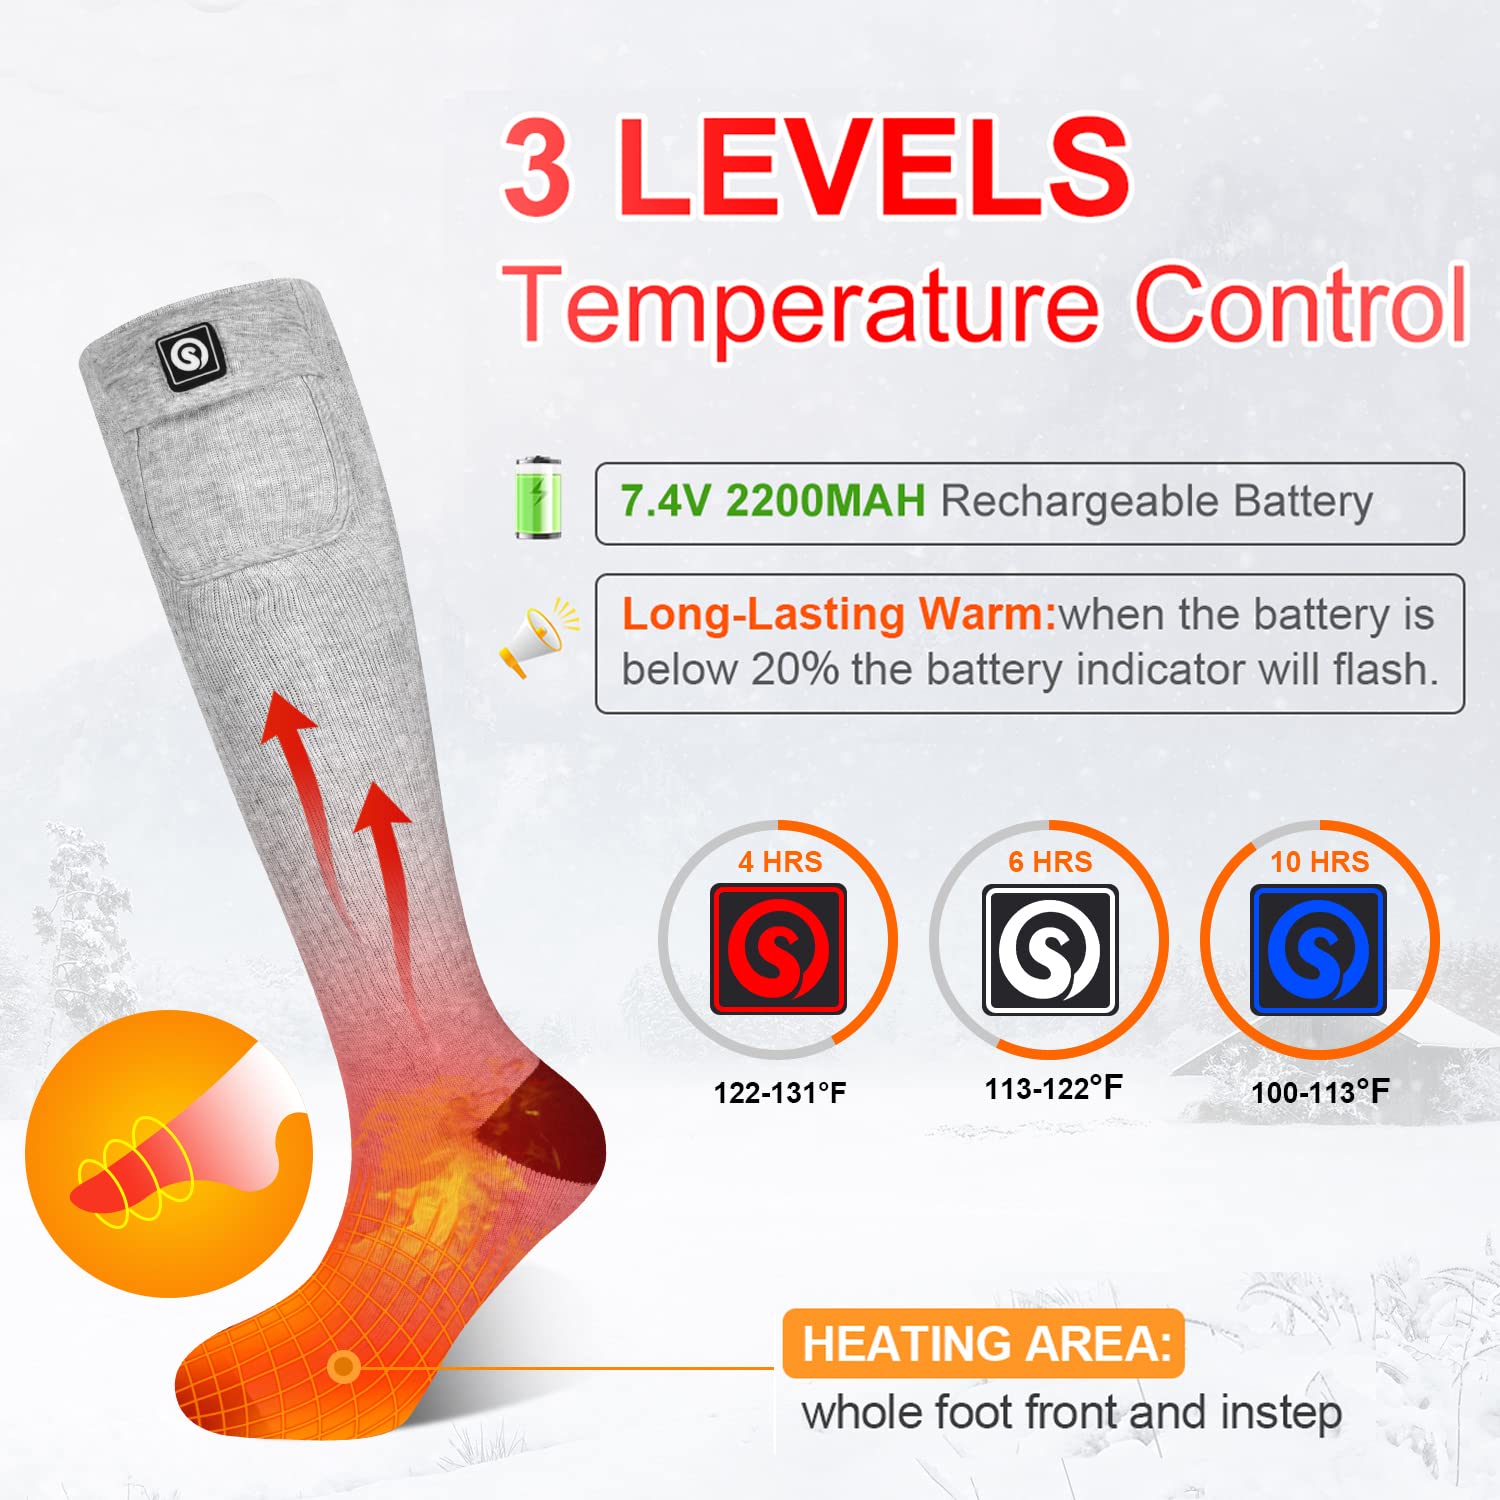 Heated Socks for Men Women,7.4V 2200mah Electric Rechargeable Battery Warm Winter Socks,Cold Weather Thermal Heating Socks Foot Warmers for Hunting Skiing Camping (Gray, Large)